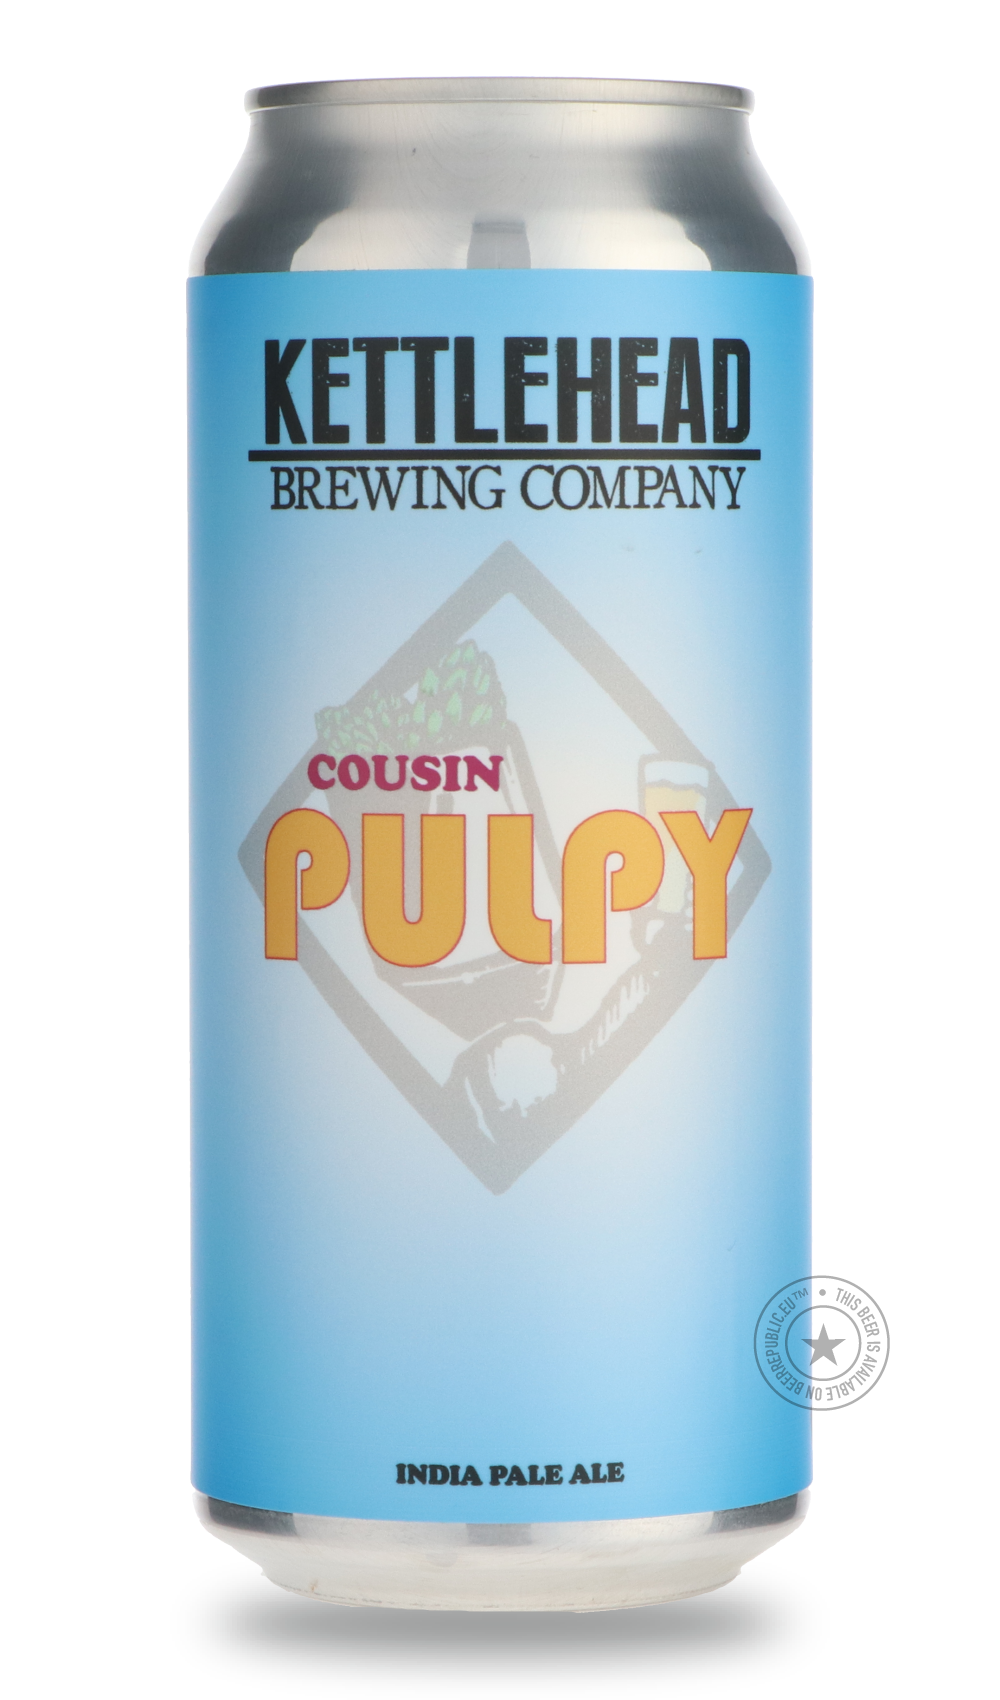 -Kettlehead- Cousin Pulpy-IPA- Only @ Beer Republic - The best online beer store for American & Canadian craft beer - Buy beer online from the USA and Canada - Bier online kopen - Amerikaans bier kopen - Craft beer store - Craft beer kopen - Amerikanisch bier kaufen - Bier online kaufen - Acheter biere online - IPA - Stout - Porter - New England IPA - Hazy IPA - Imperial Stout - Barrel Aged - Barrel Aged Imperial Stout - Brown - Dark beer - Blond - Blonde - Pilsner - Lager - Wheat - Weizen - Amber - Barley 